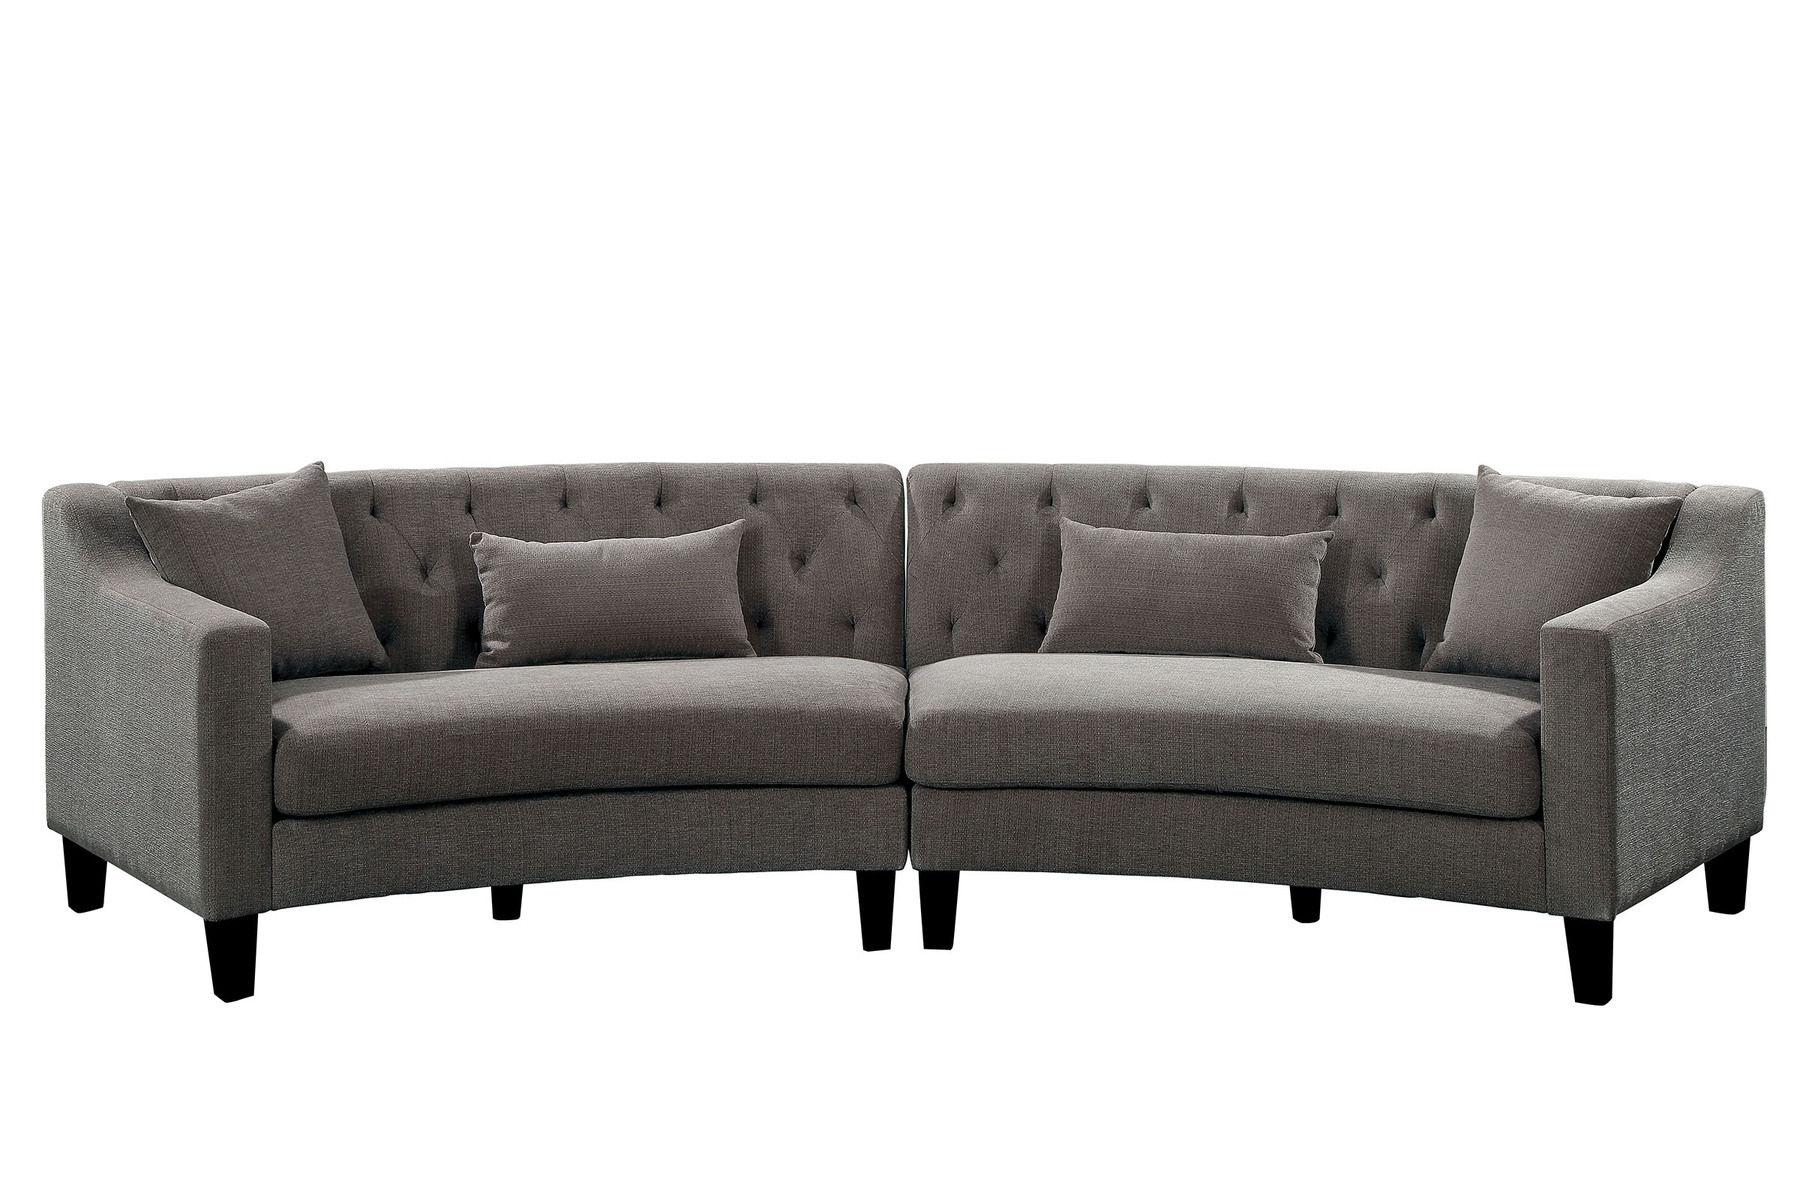 Transitional Sectional Sofa and Ottoman CM6370-2PC Sarin CM6370-2PC in Warm Gray Chenille